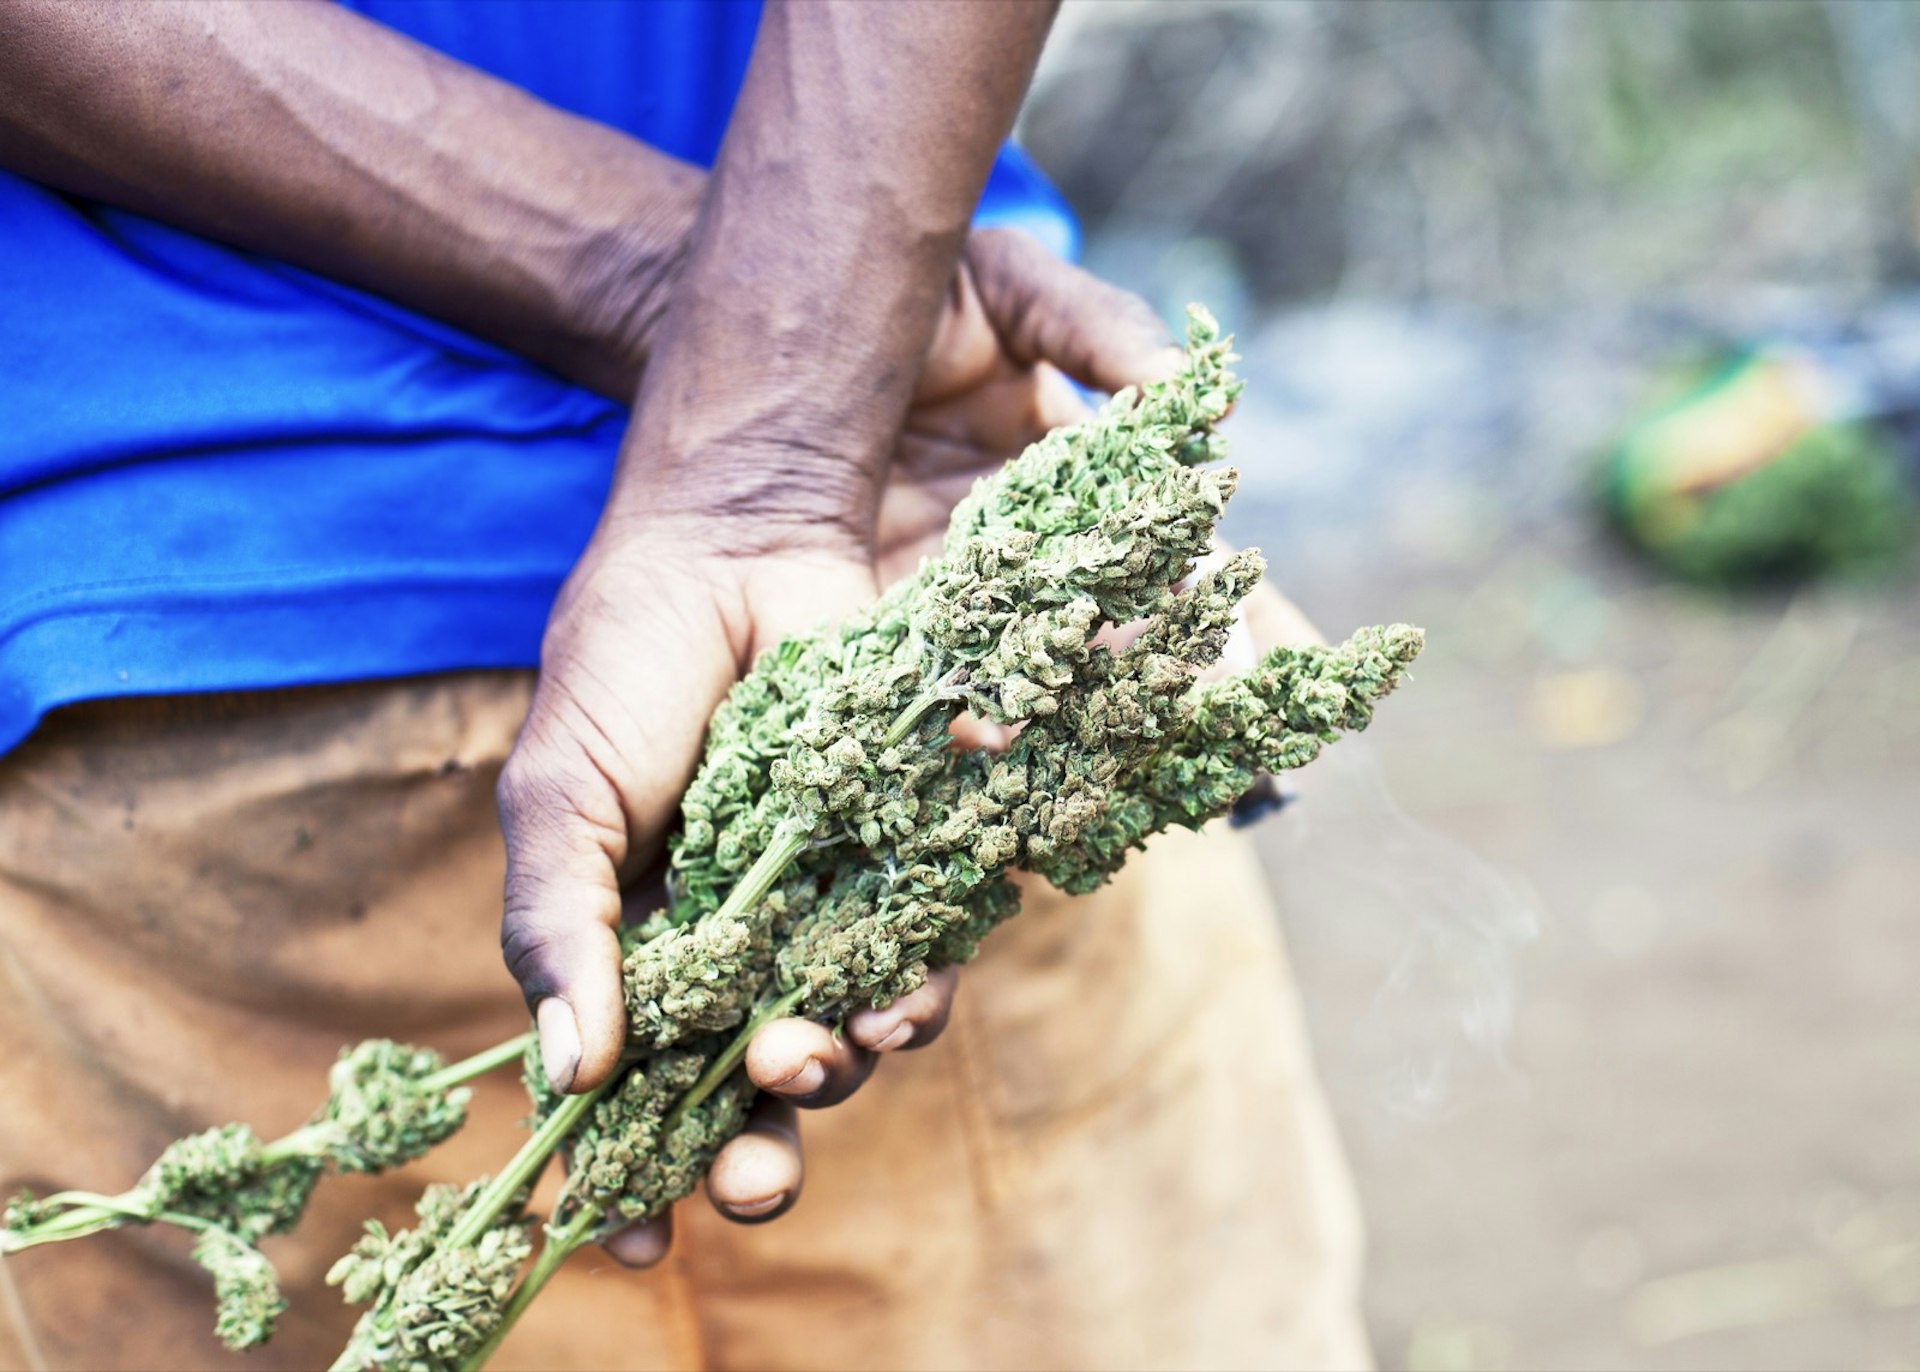 A man wearing a blue shirt holds a handful of ganja behind his back; smoking weed jamaica